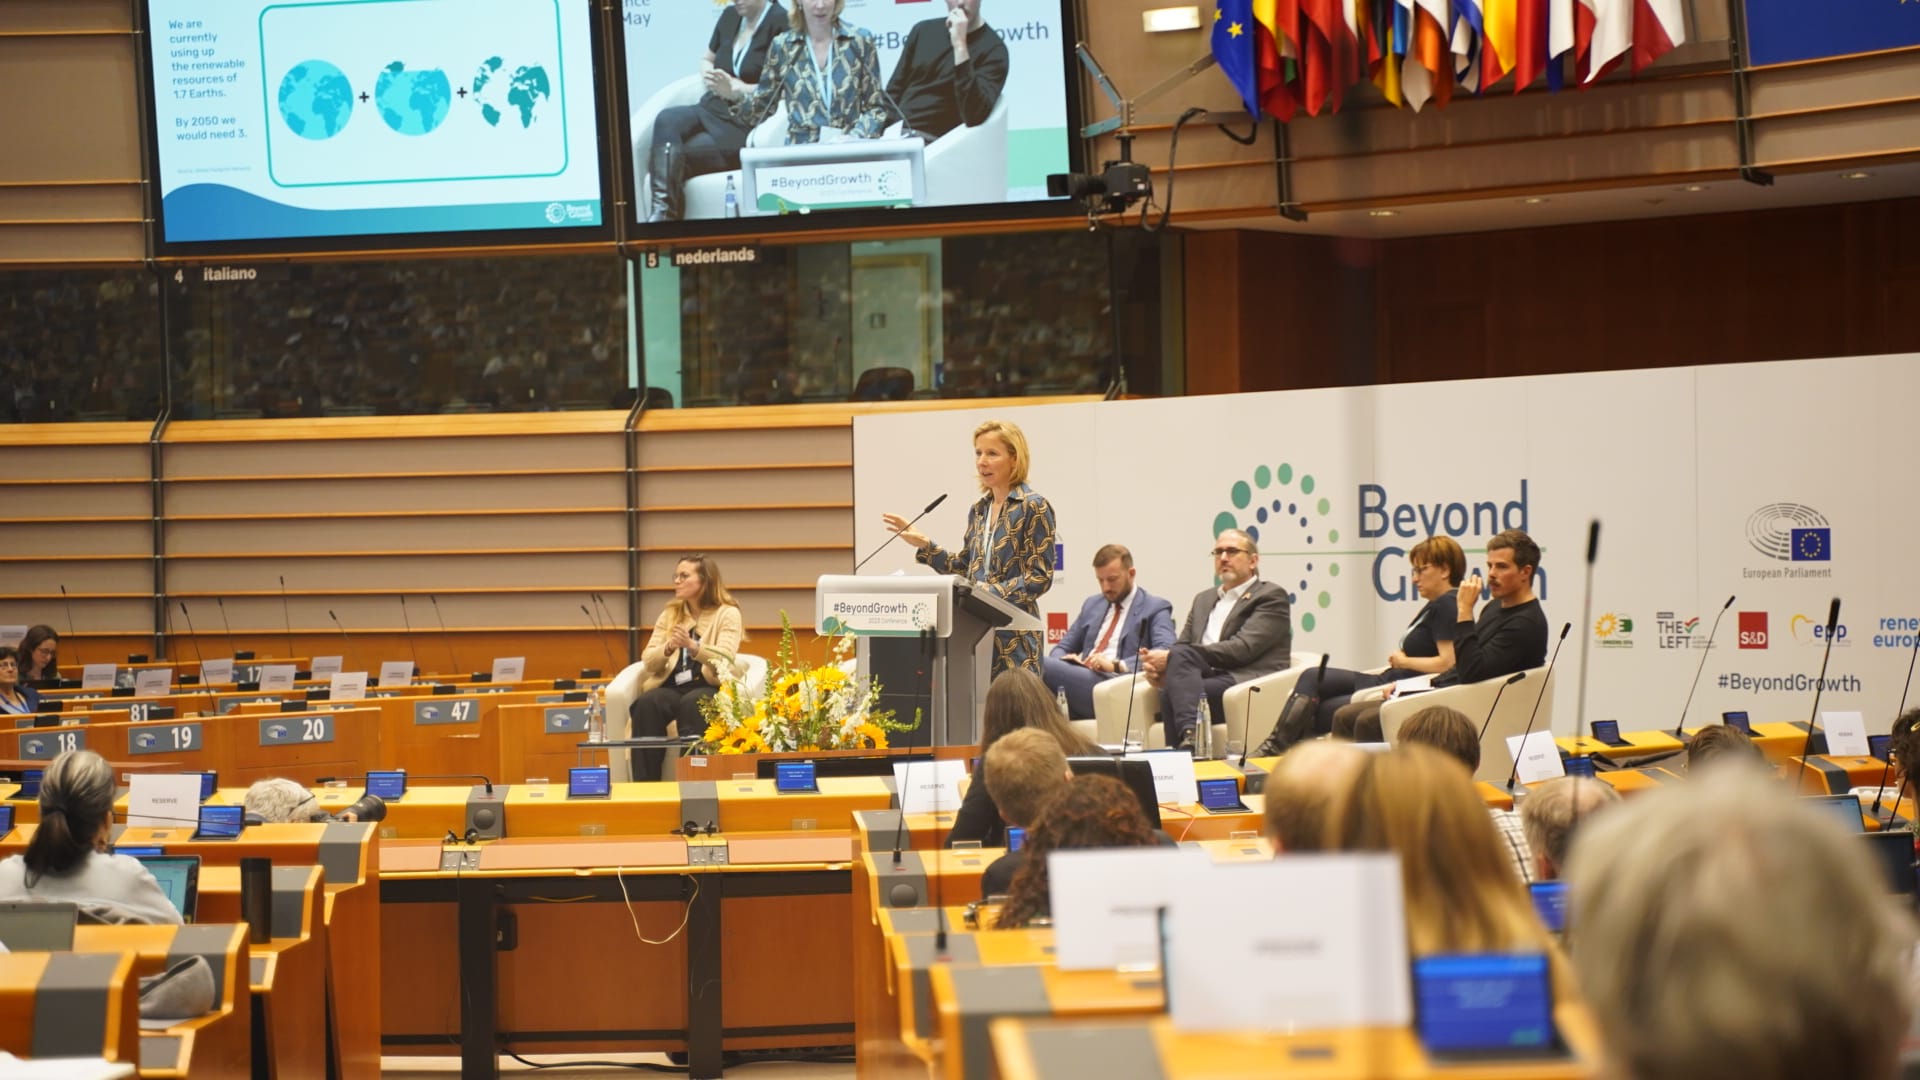 Stientje van Veldhoven addressed the Beyond Growth Conference 2023.